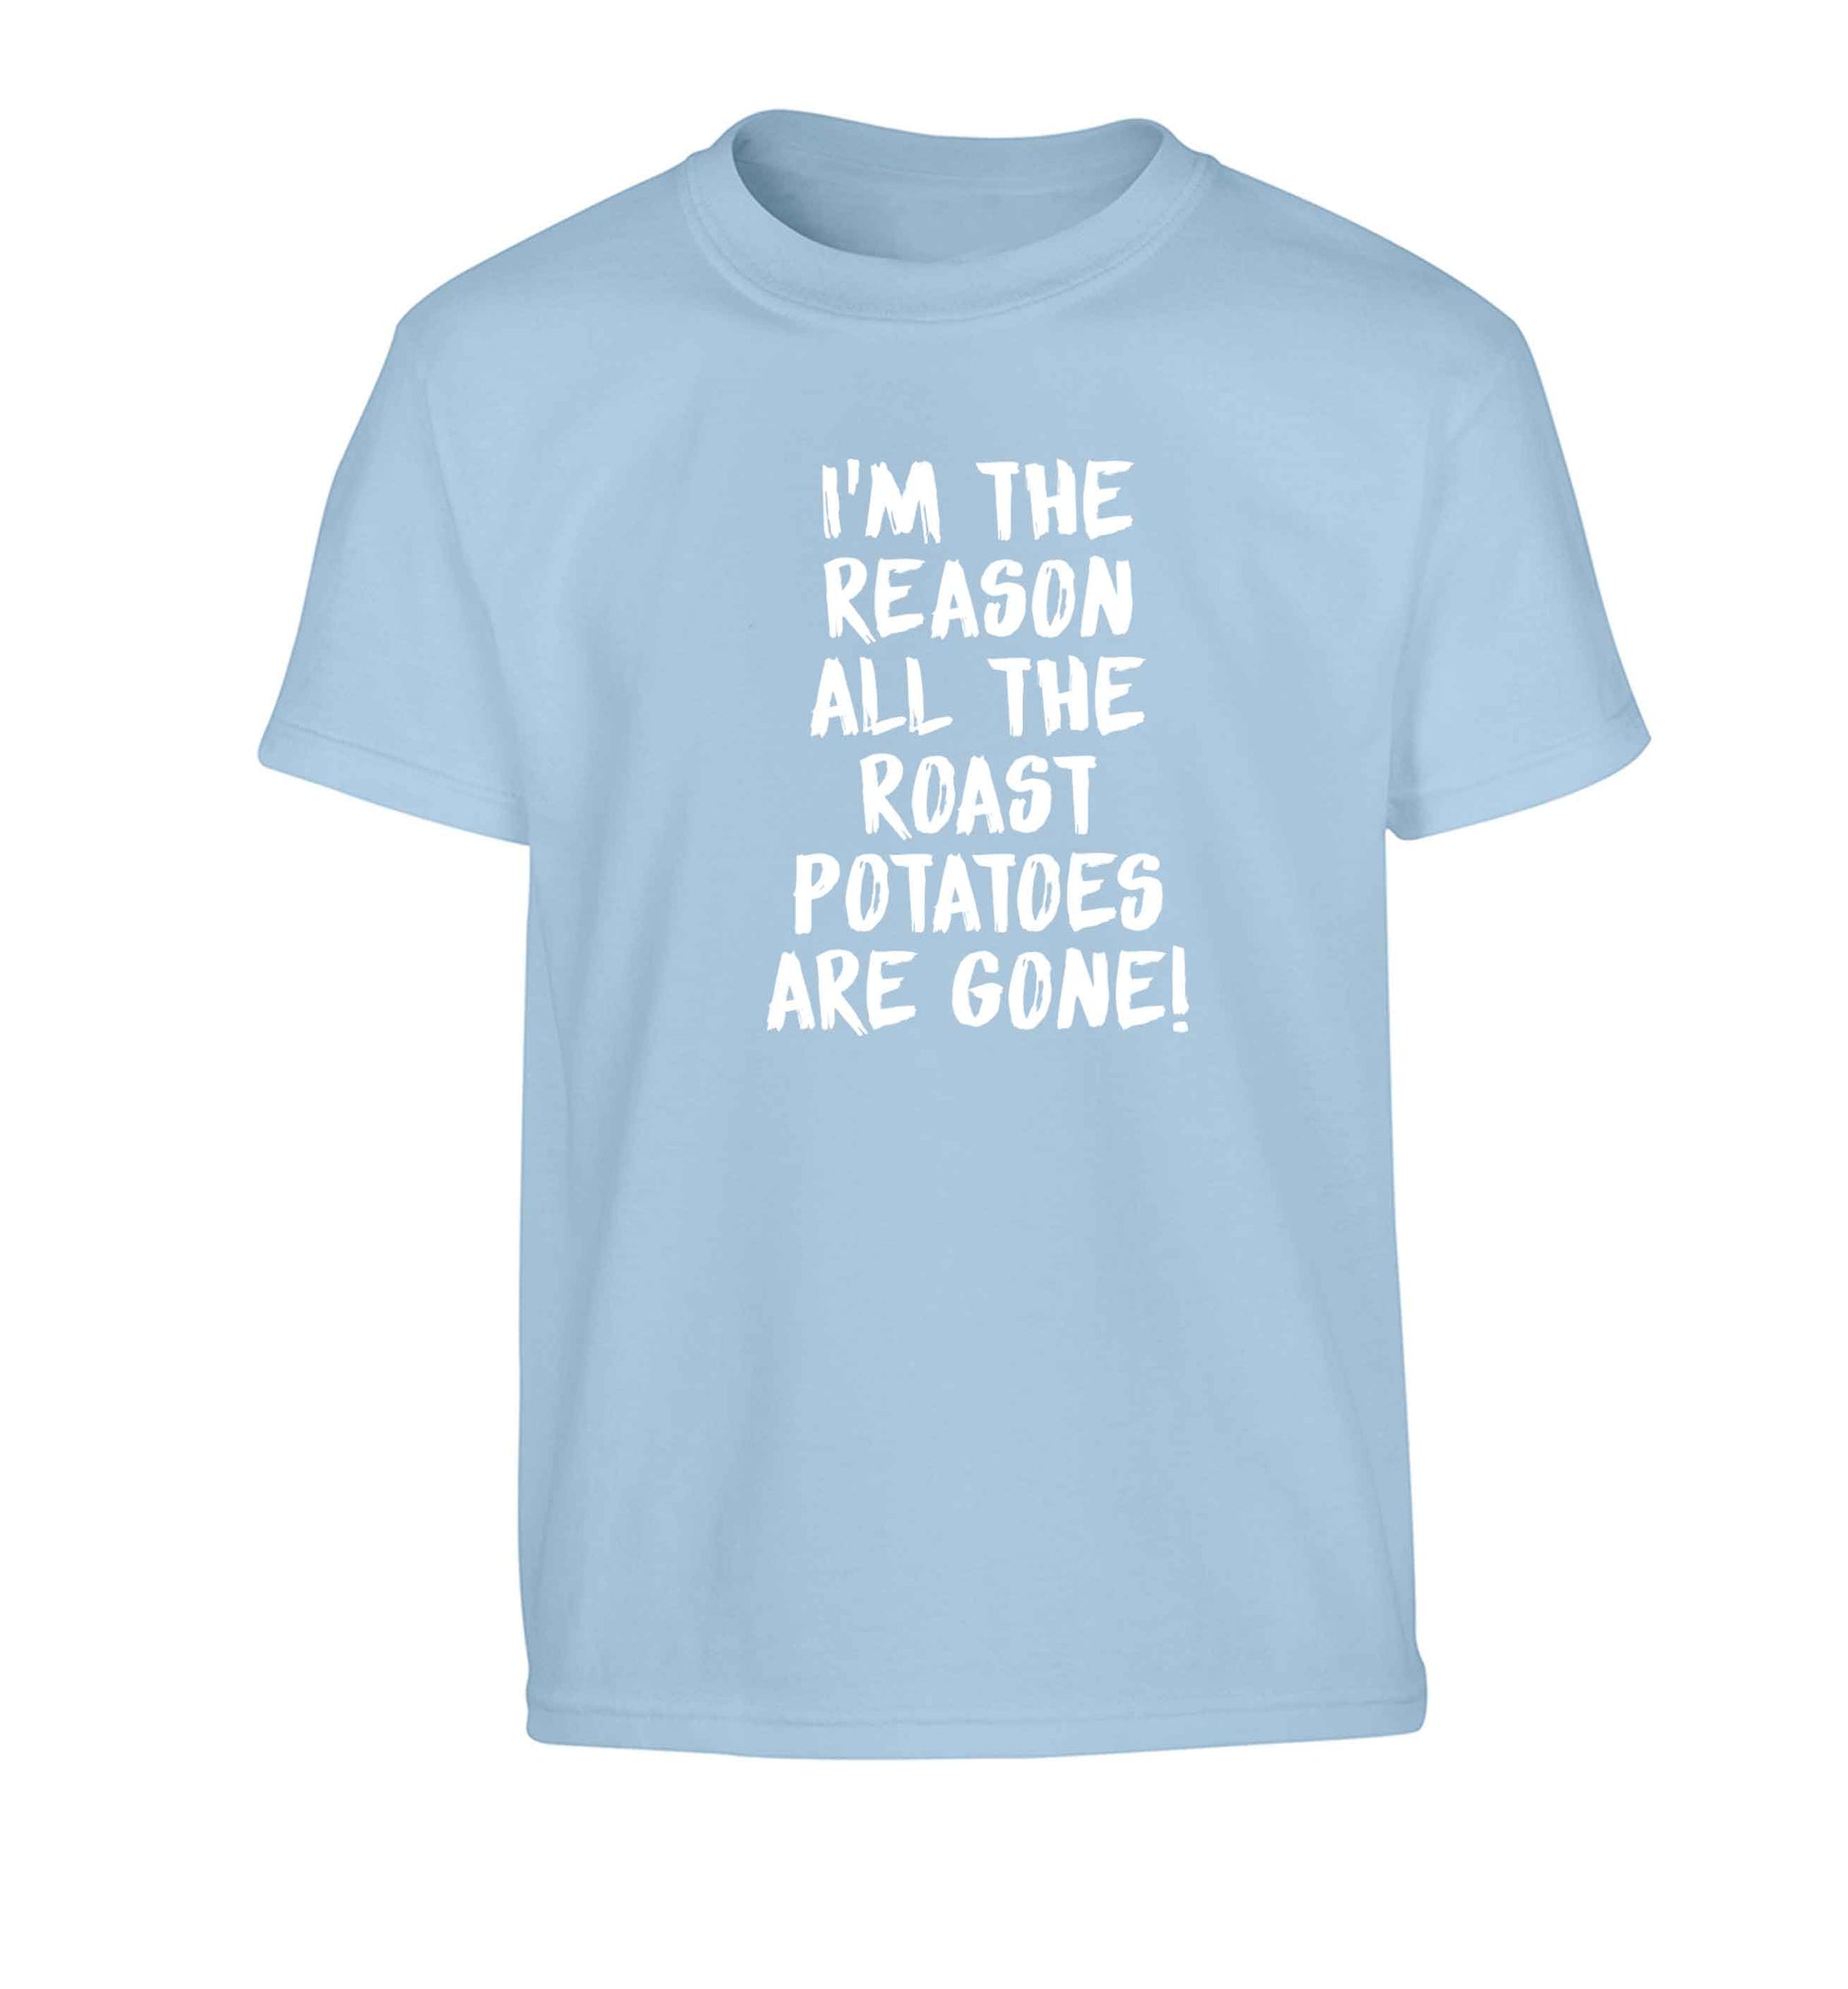 I'm the reason all the roast potatoes are gone Children's light blue Tshirt 12-13 Years